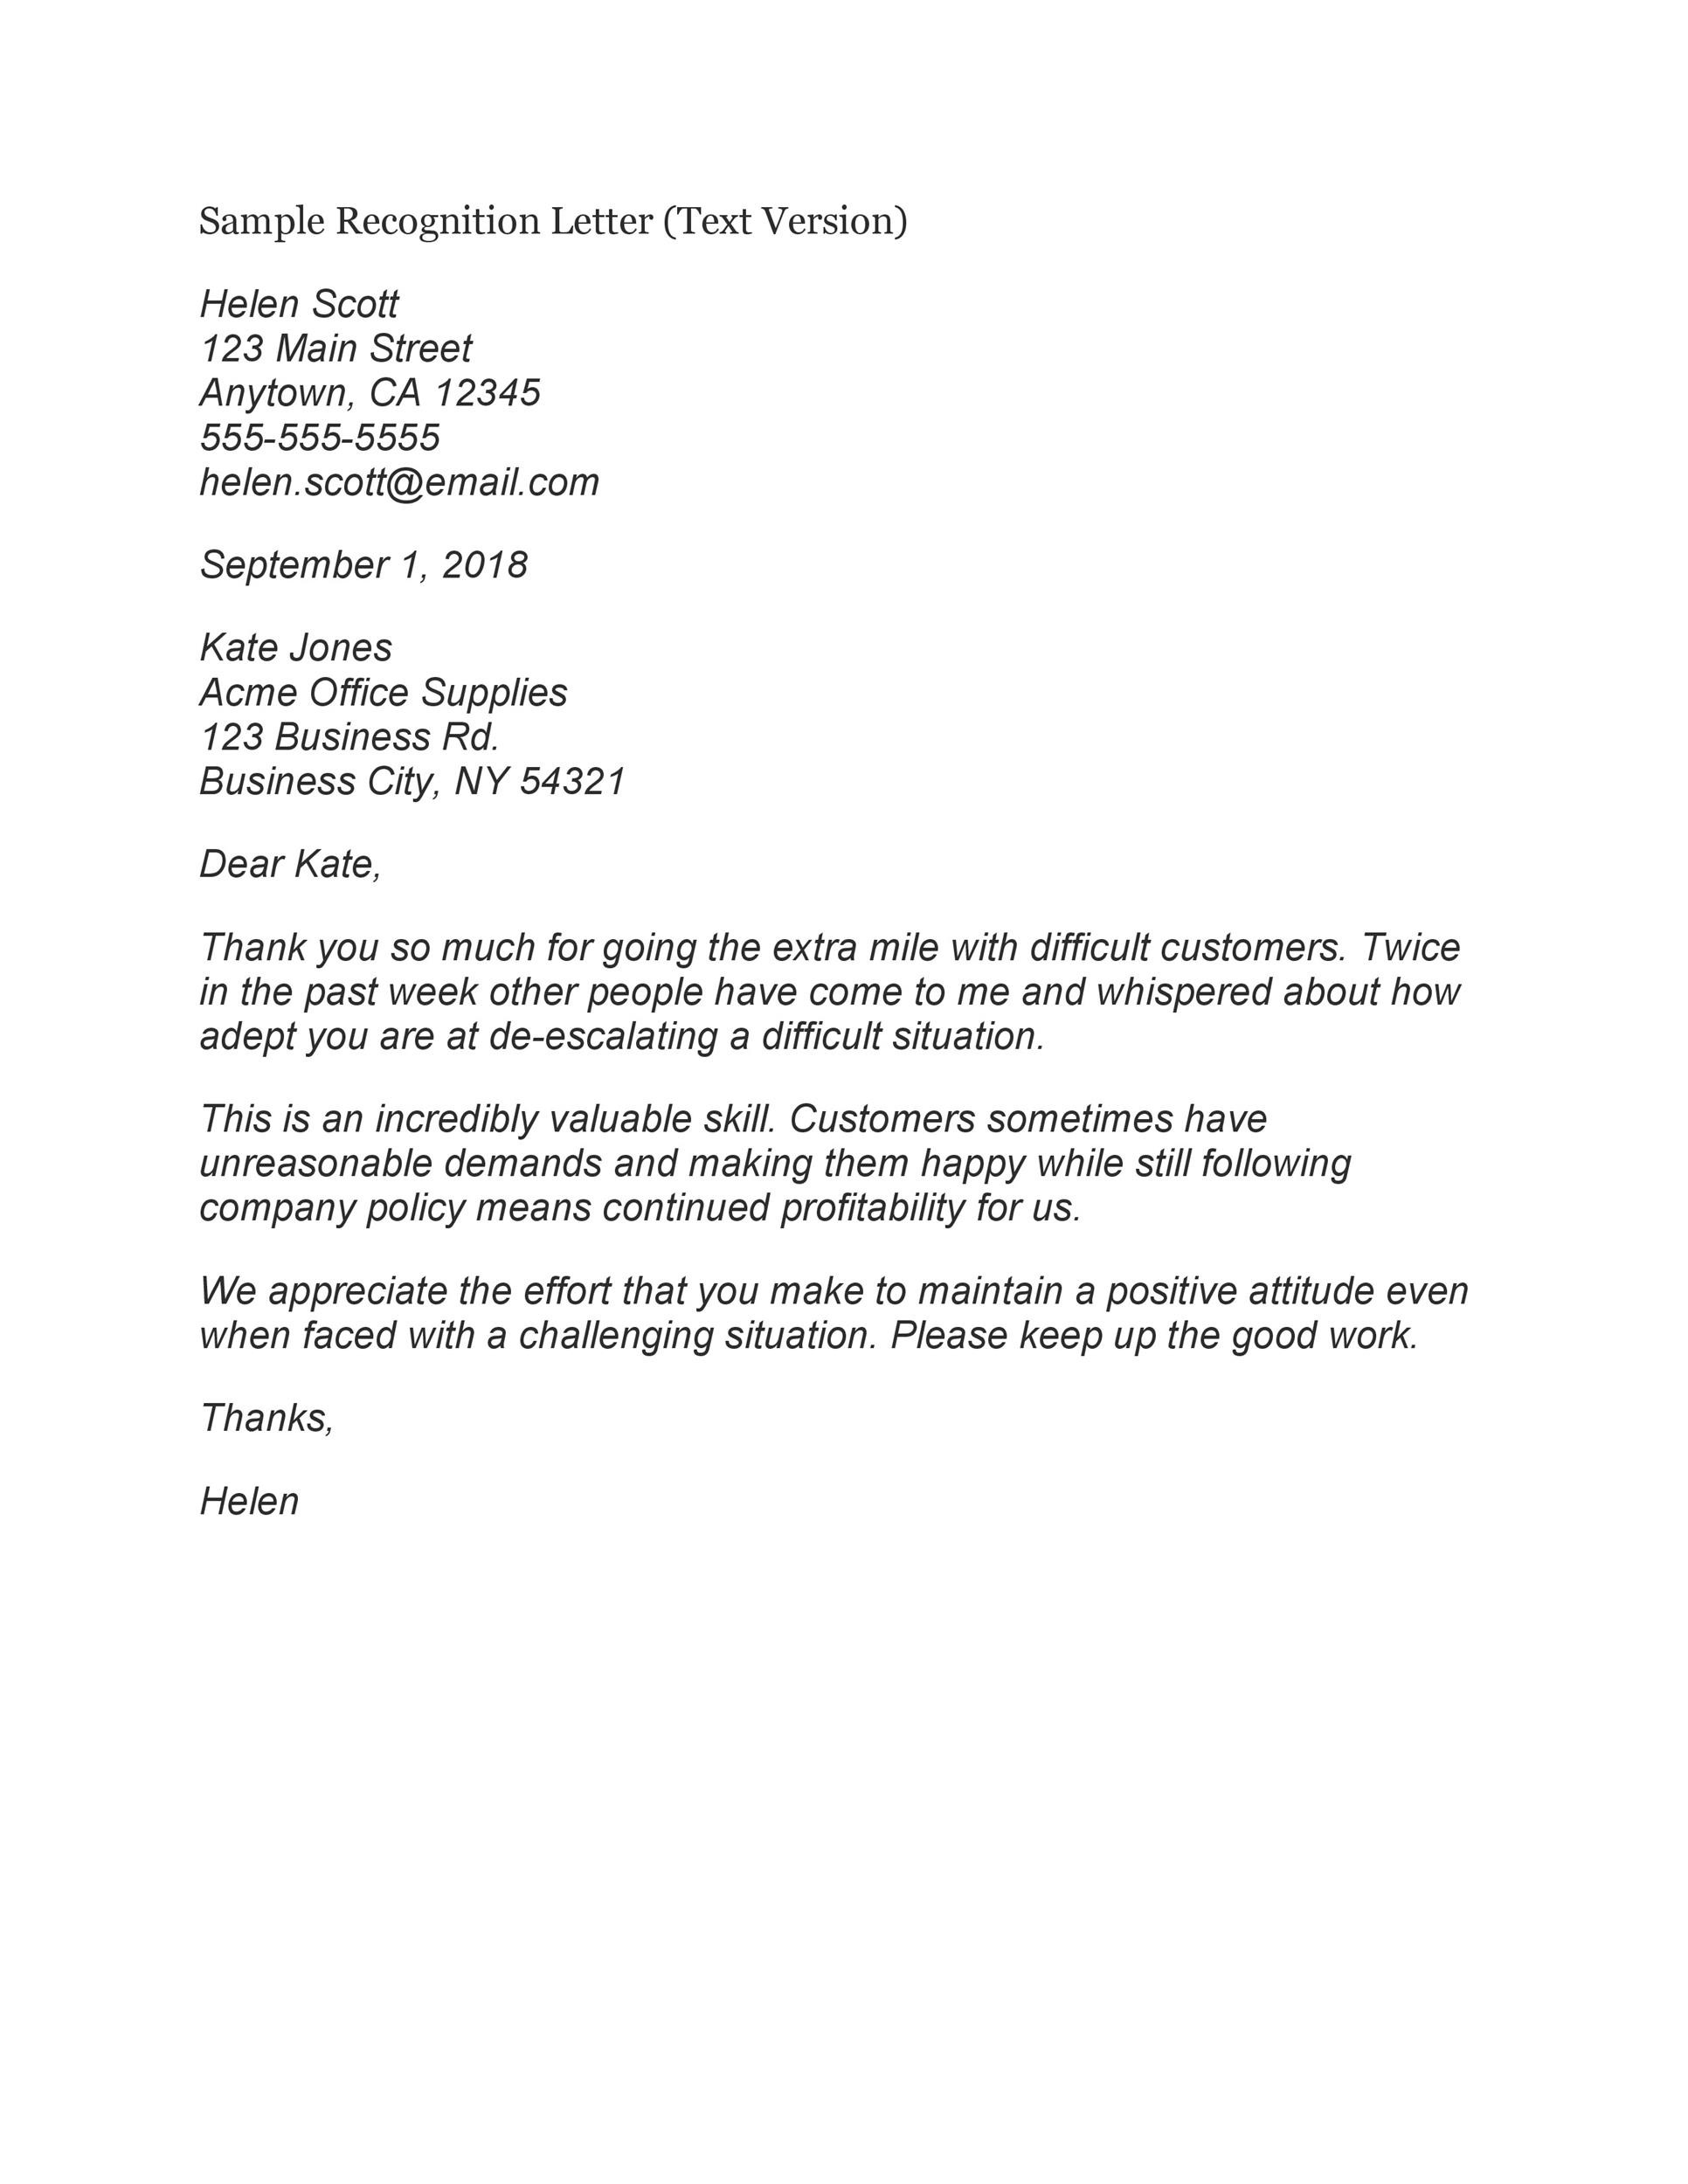 Employee Recognition Letter To Manager from templatelab.com